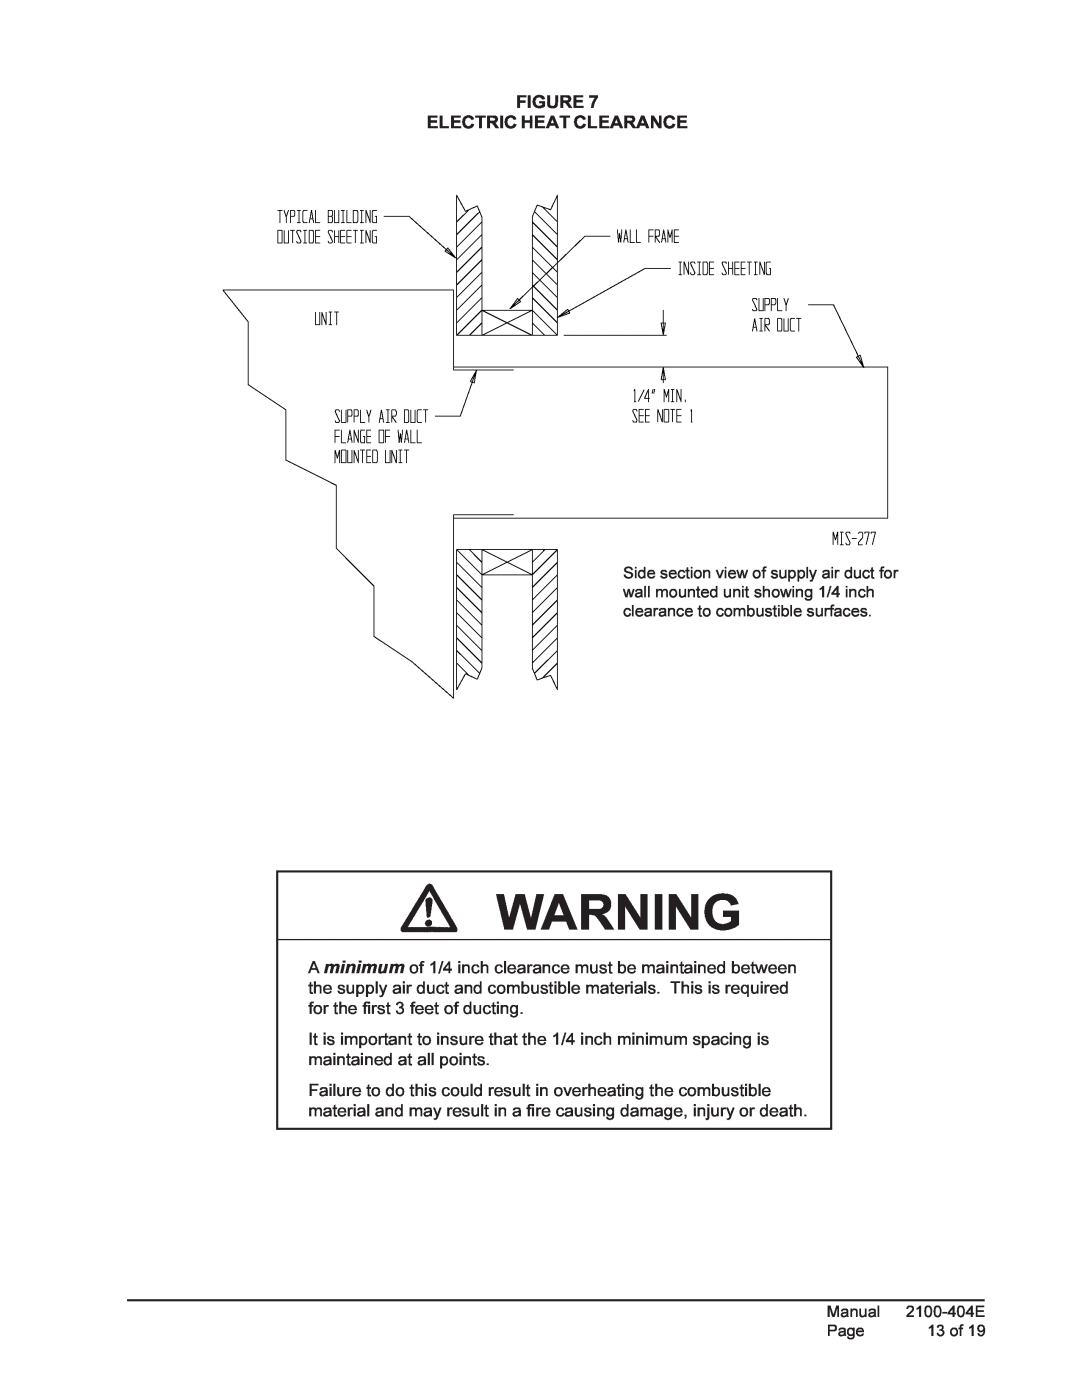 Bard 2100-404E installation instructions Figure Electric Heat Clearance 